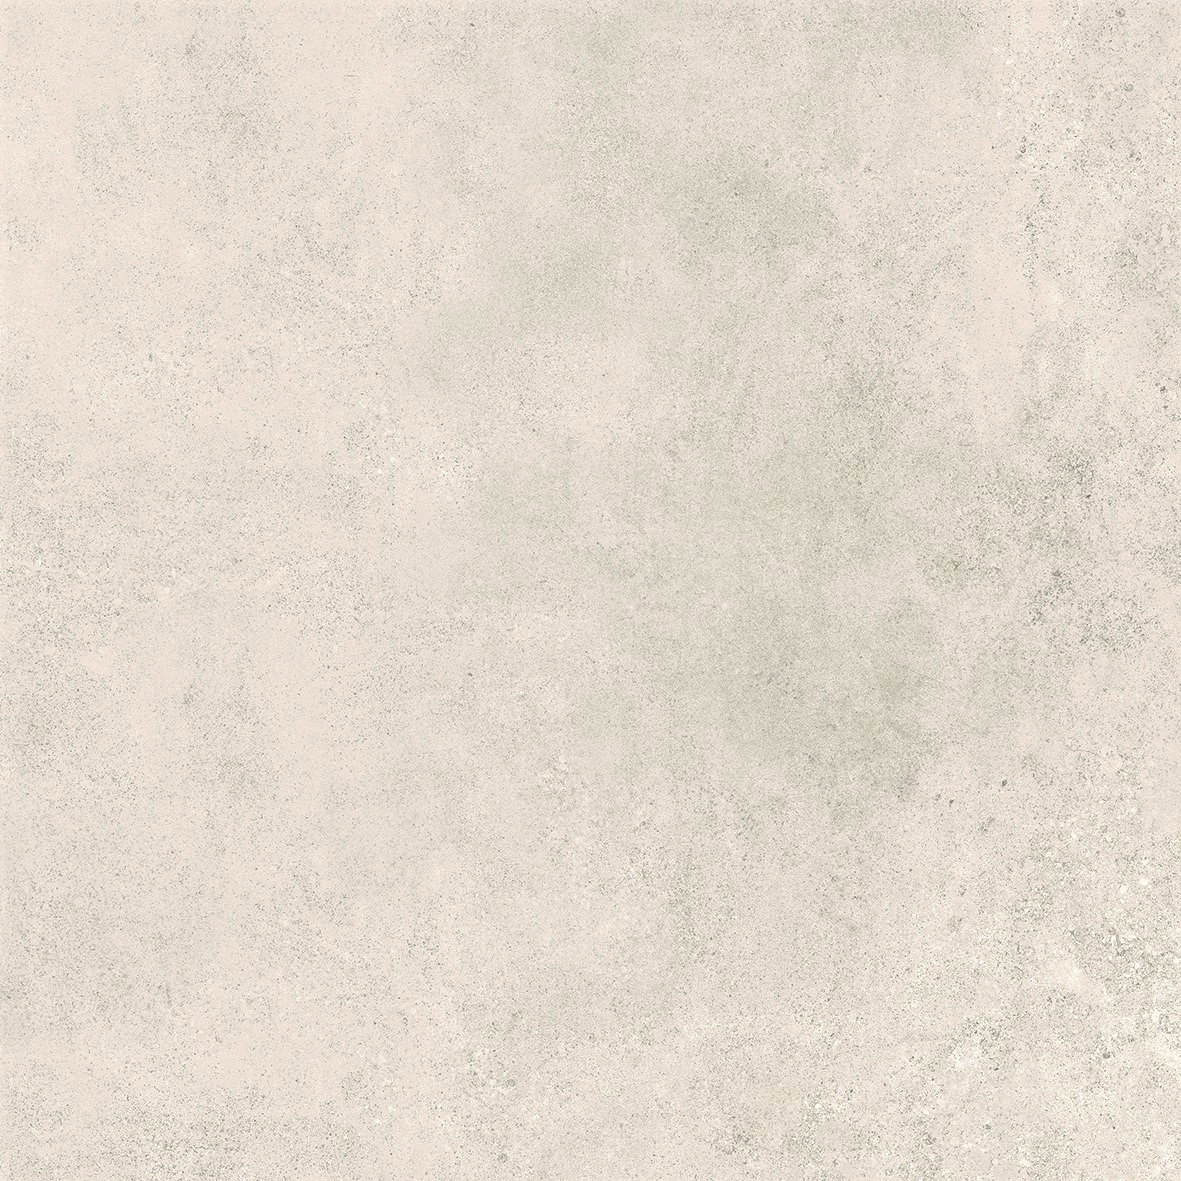 24 X 48 Absolute White Rectified Porcelain tile